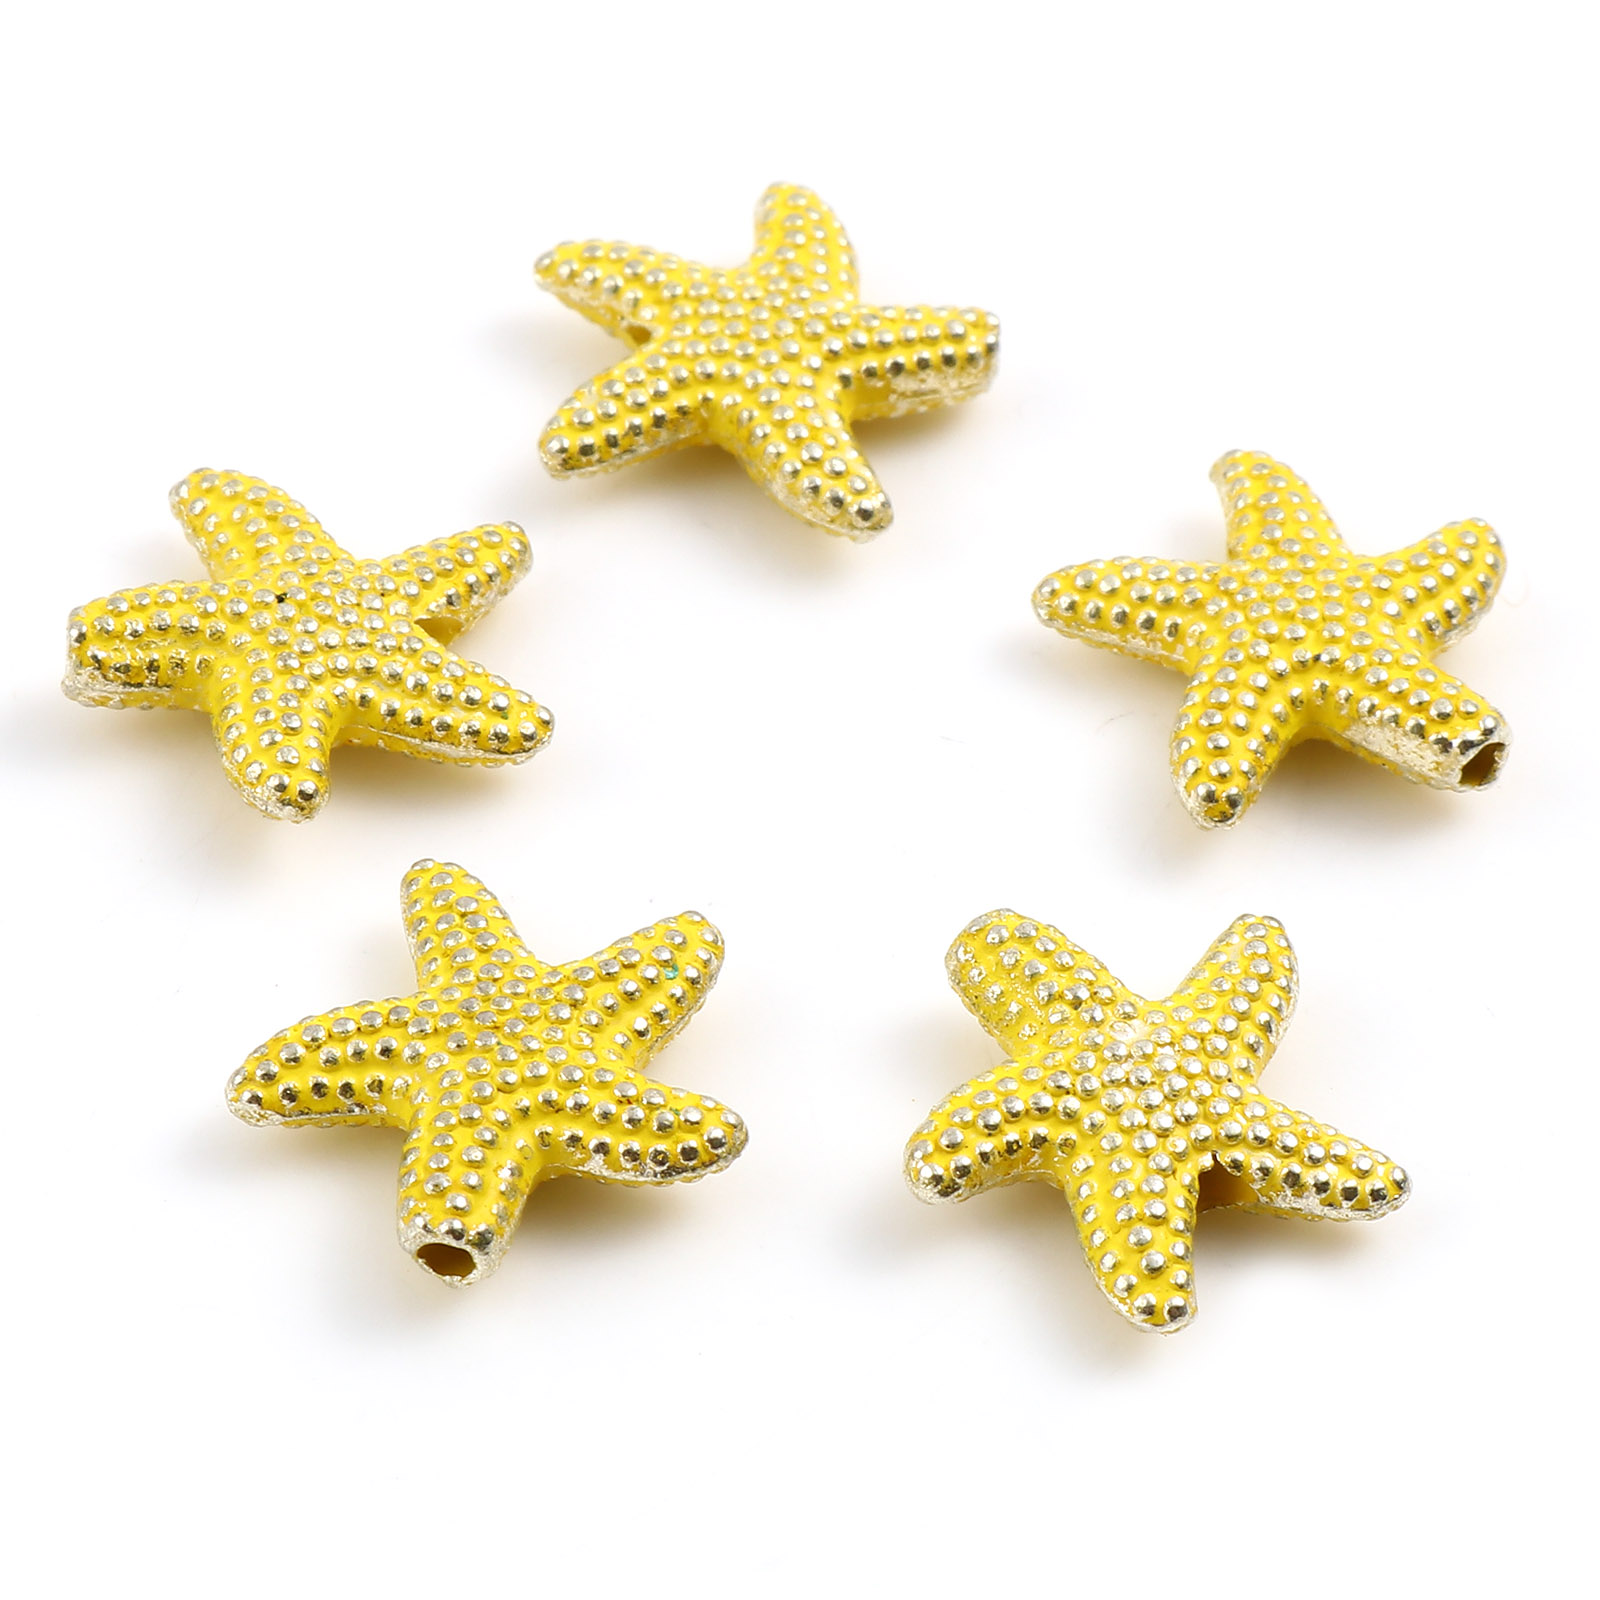 Picture of Zinc Based Alloy Ocean Jewelry Spacer Beads Star Fish Yellow About 14mm x 13.5mm, Hole: Approx 1.3mm, 20 PCs